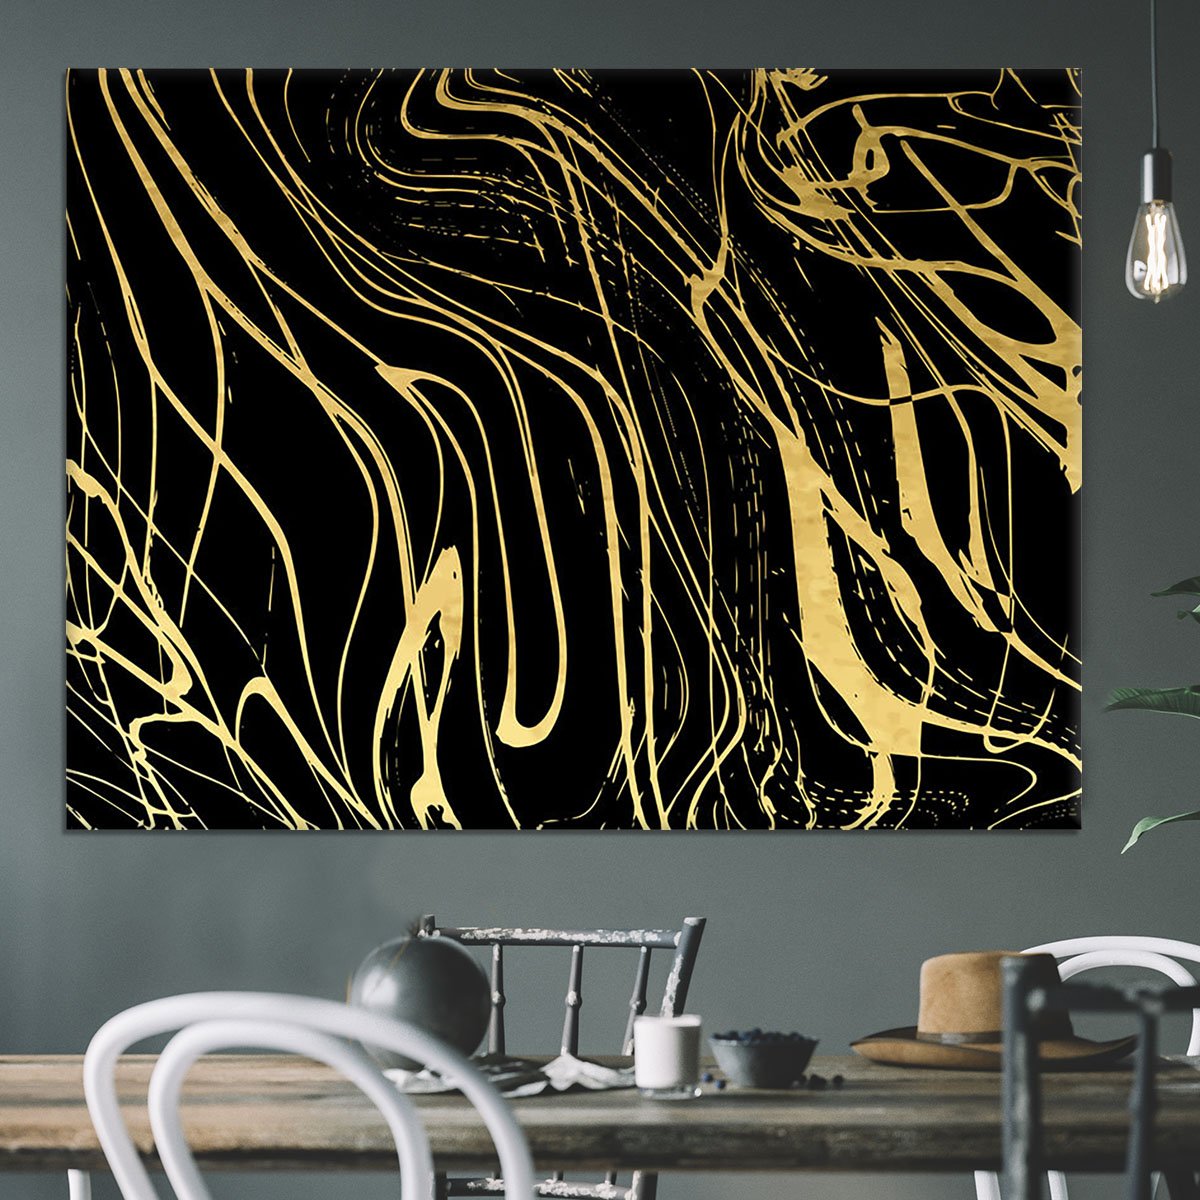 Black and Gold Swirled Abstract Canvas Print or Poster